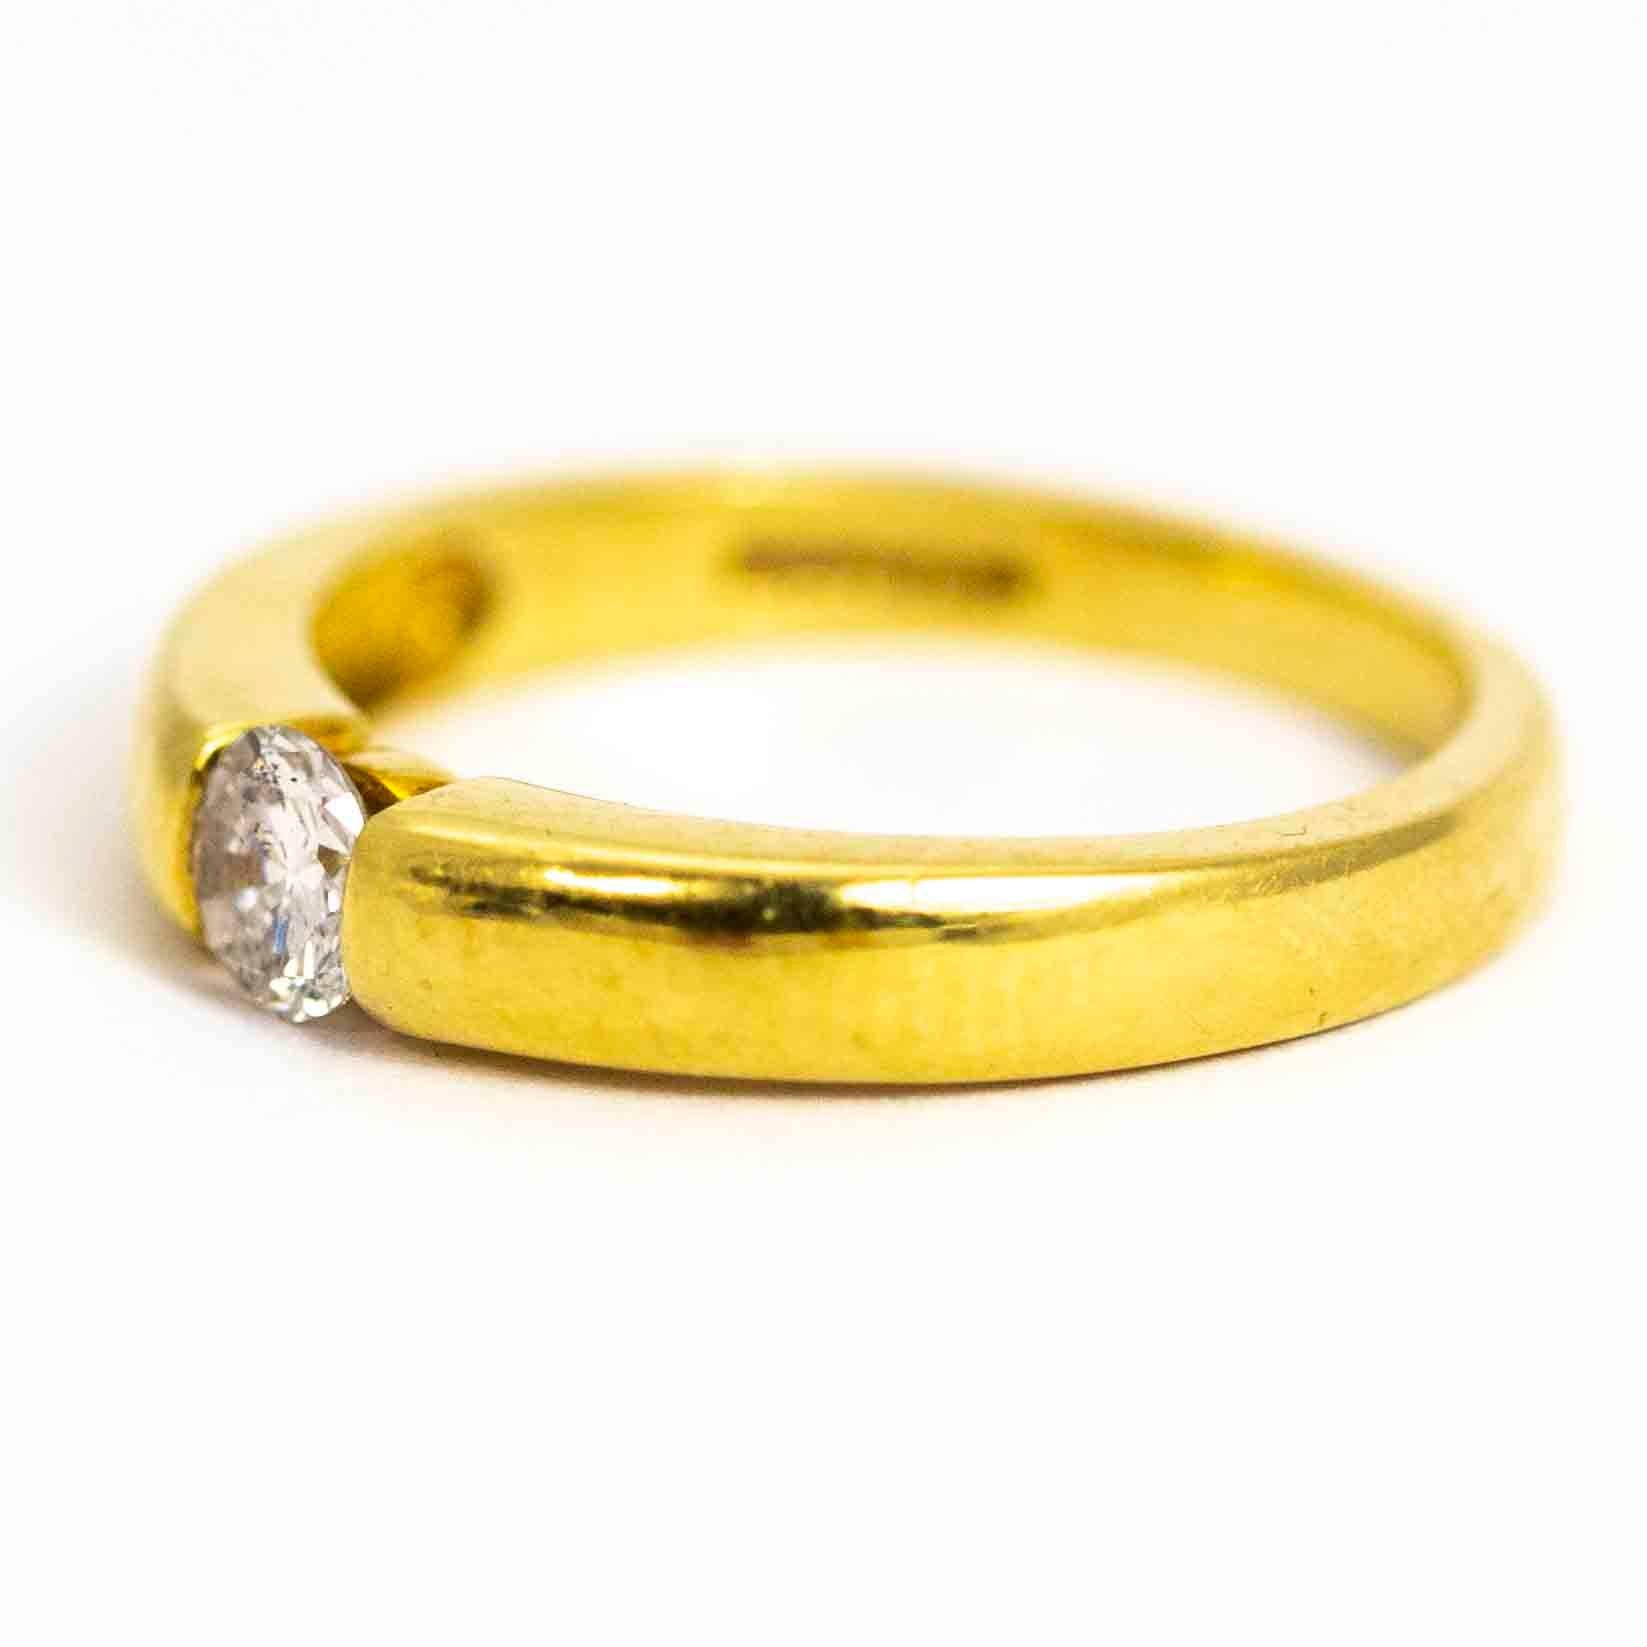 A fine vintage diamond solitaire ring. The round cut diamond is deep set and of wonderful quality, measuring approximately 25 points. Modelled in 18 carat yellow gold.

Ring Size: UK J, US 5 